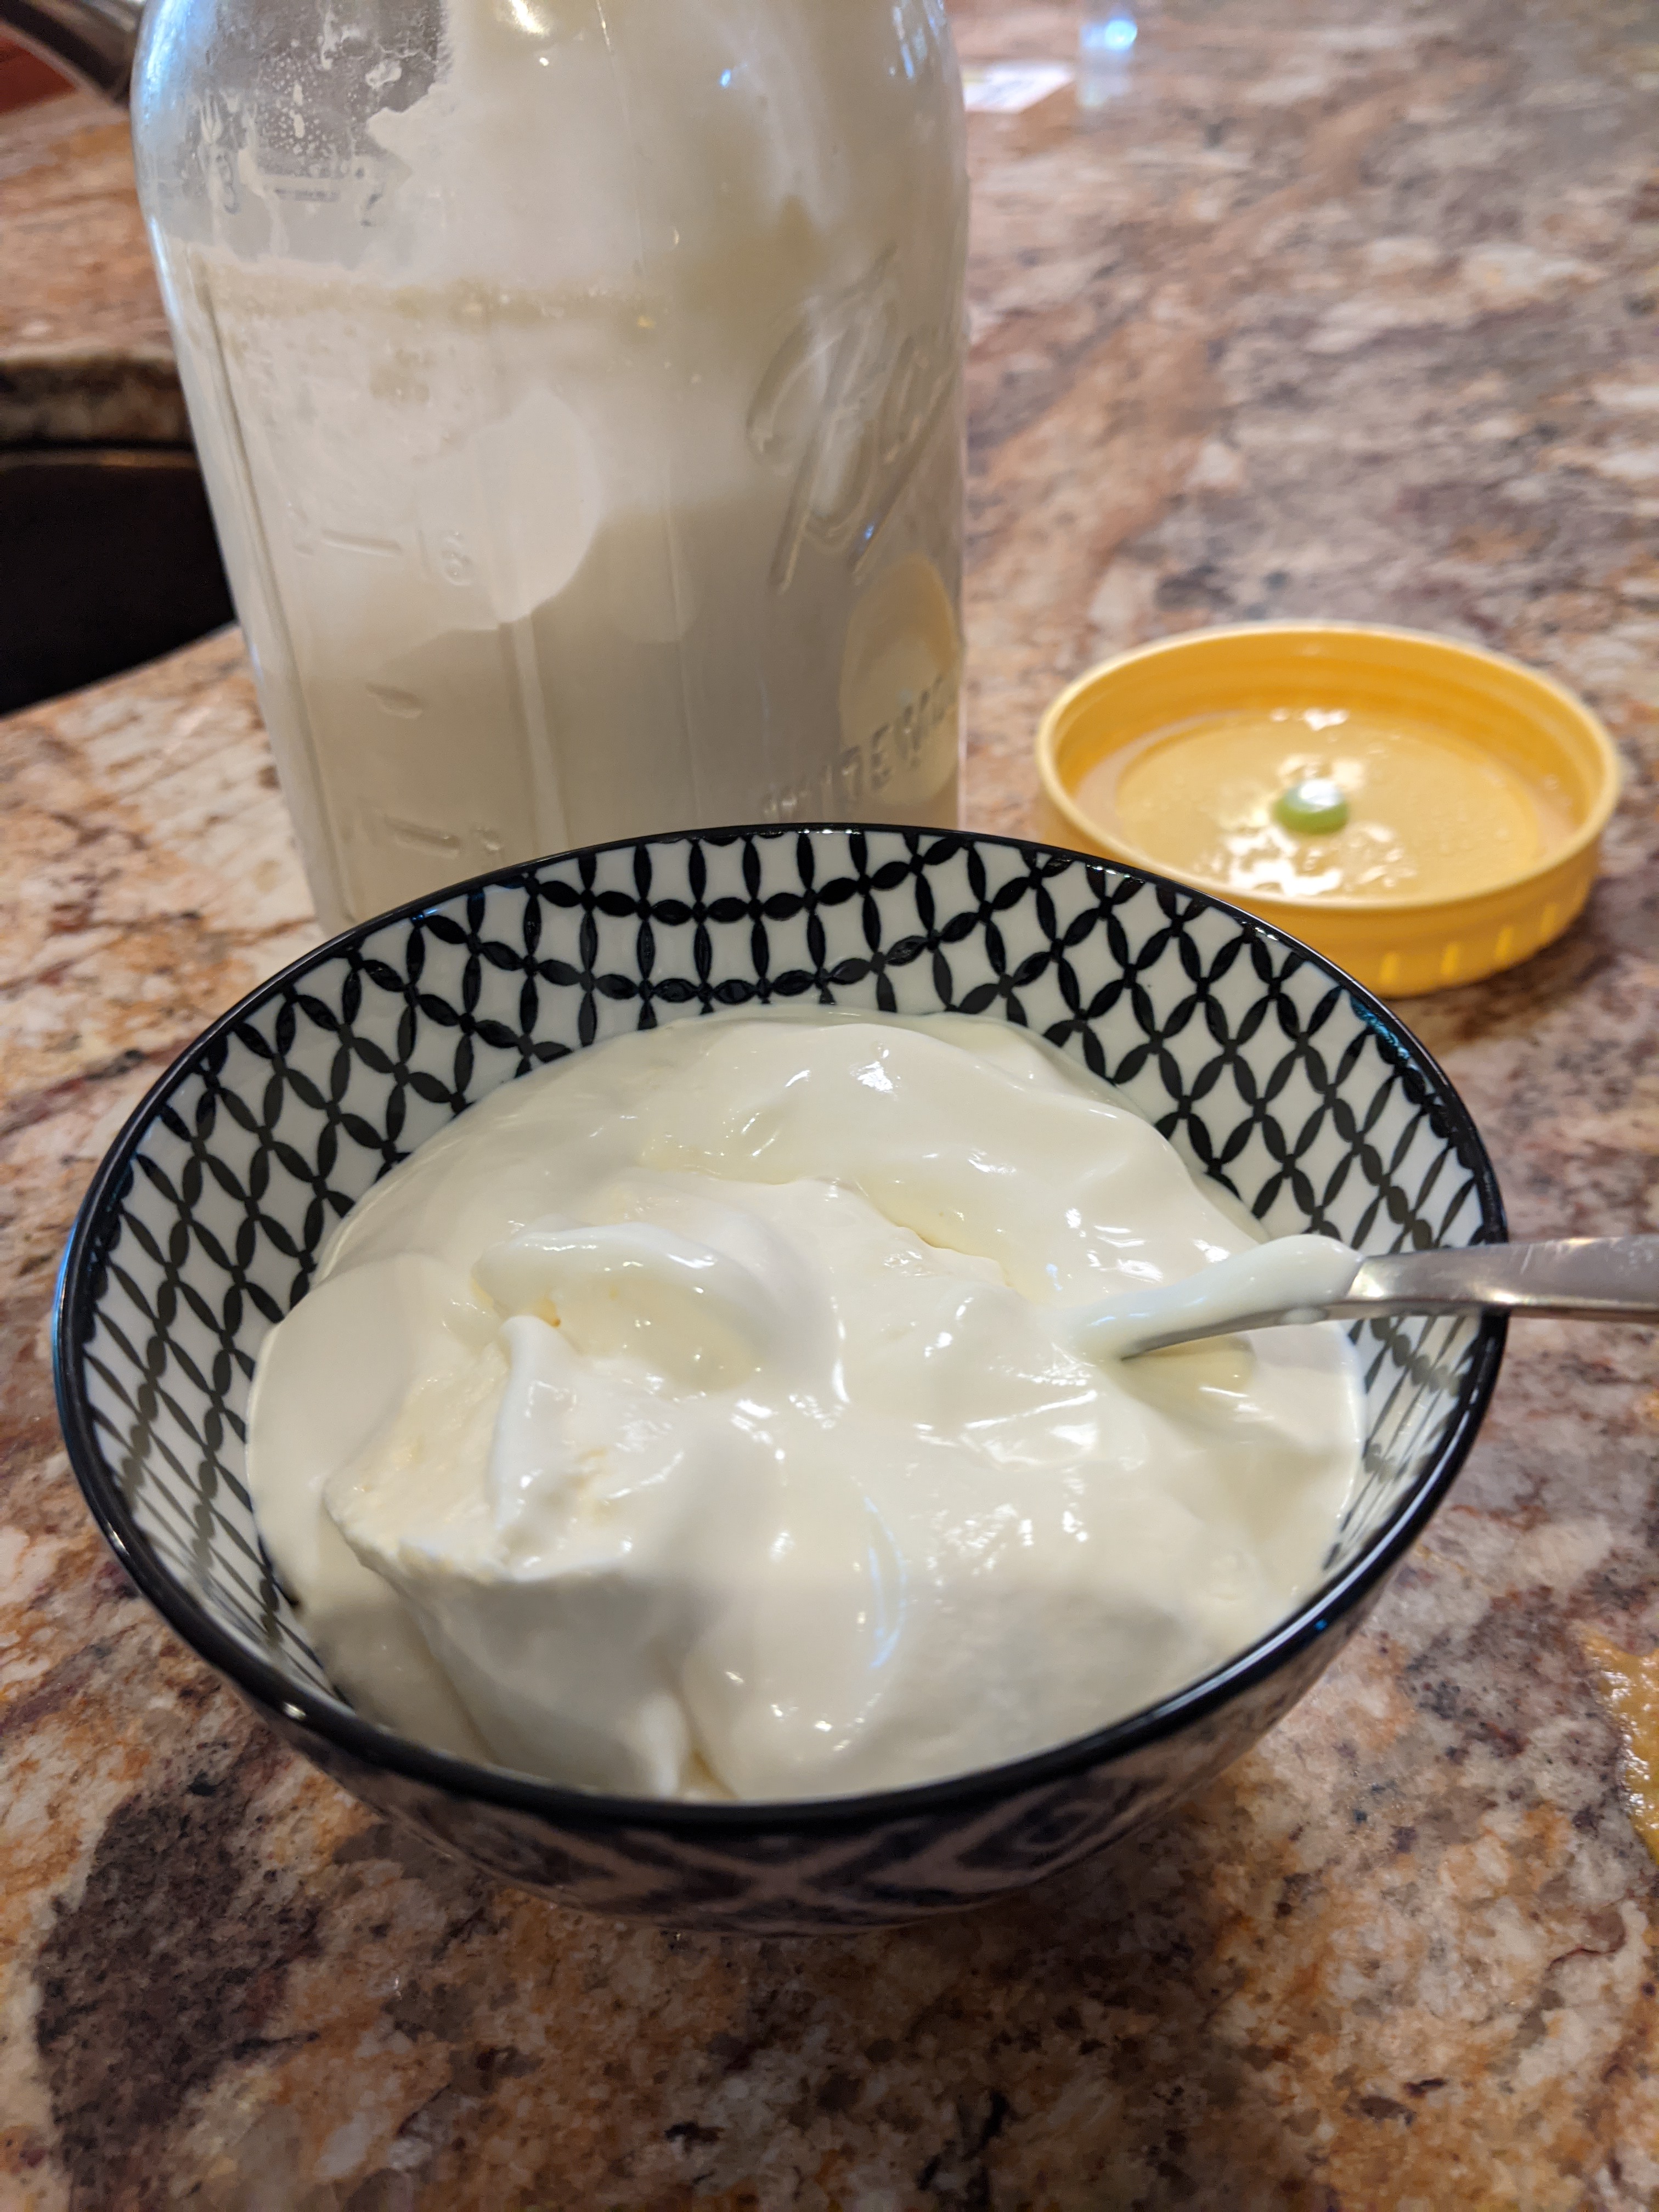 Fun with Yoghurt: fully sous vide and stearic enhanced